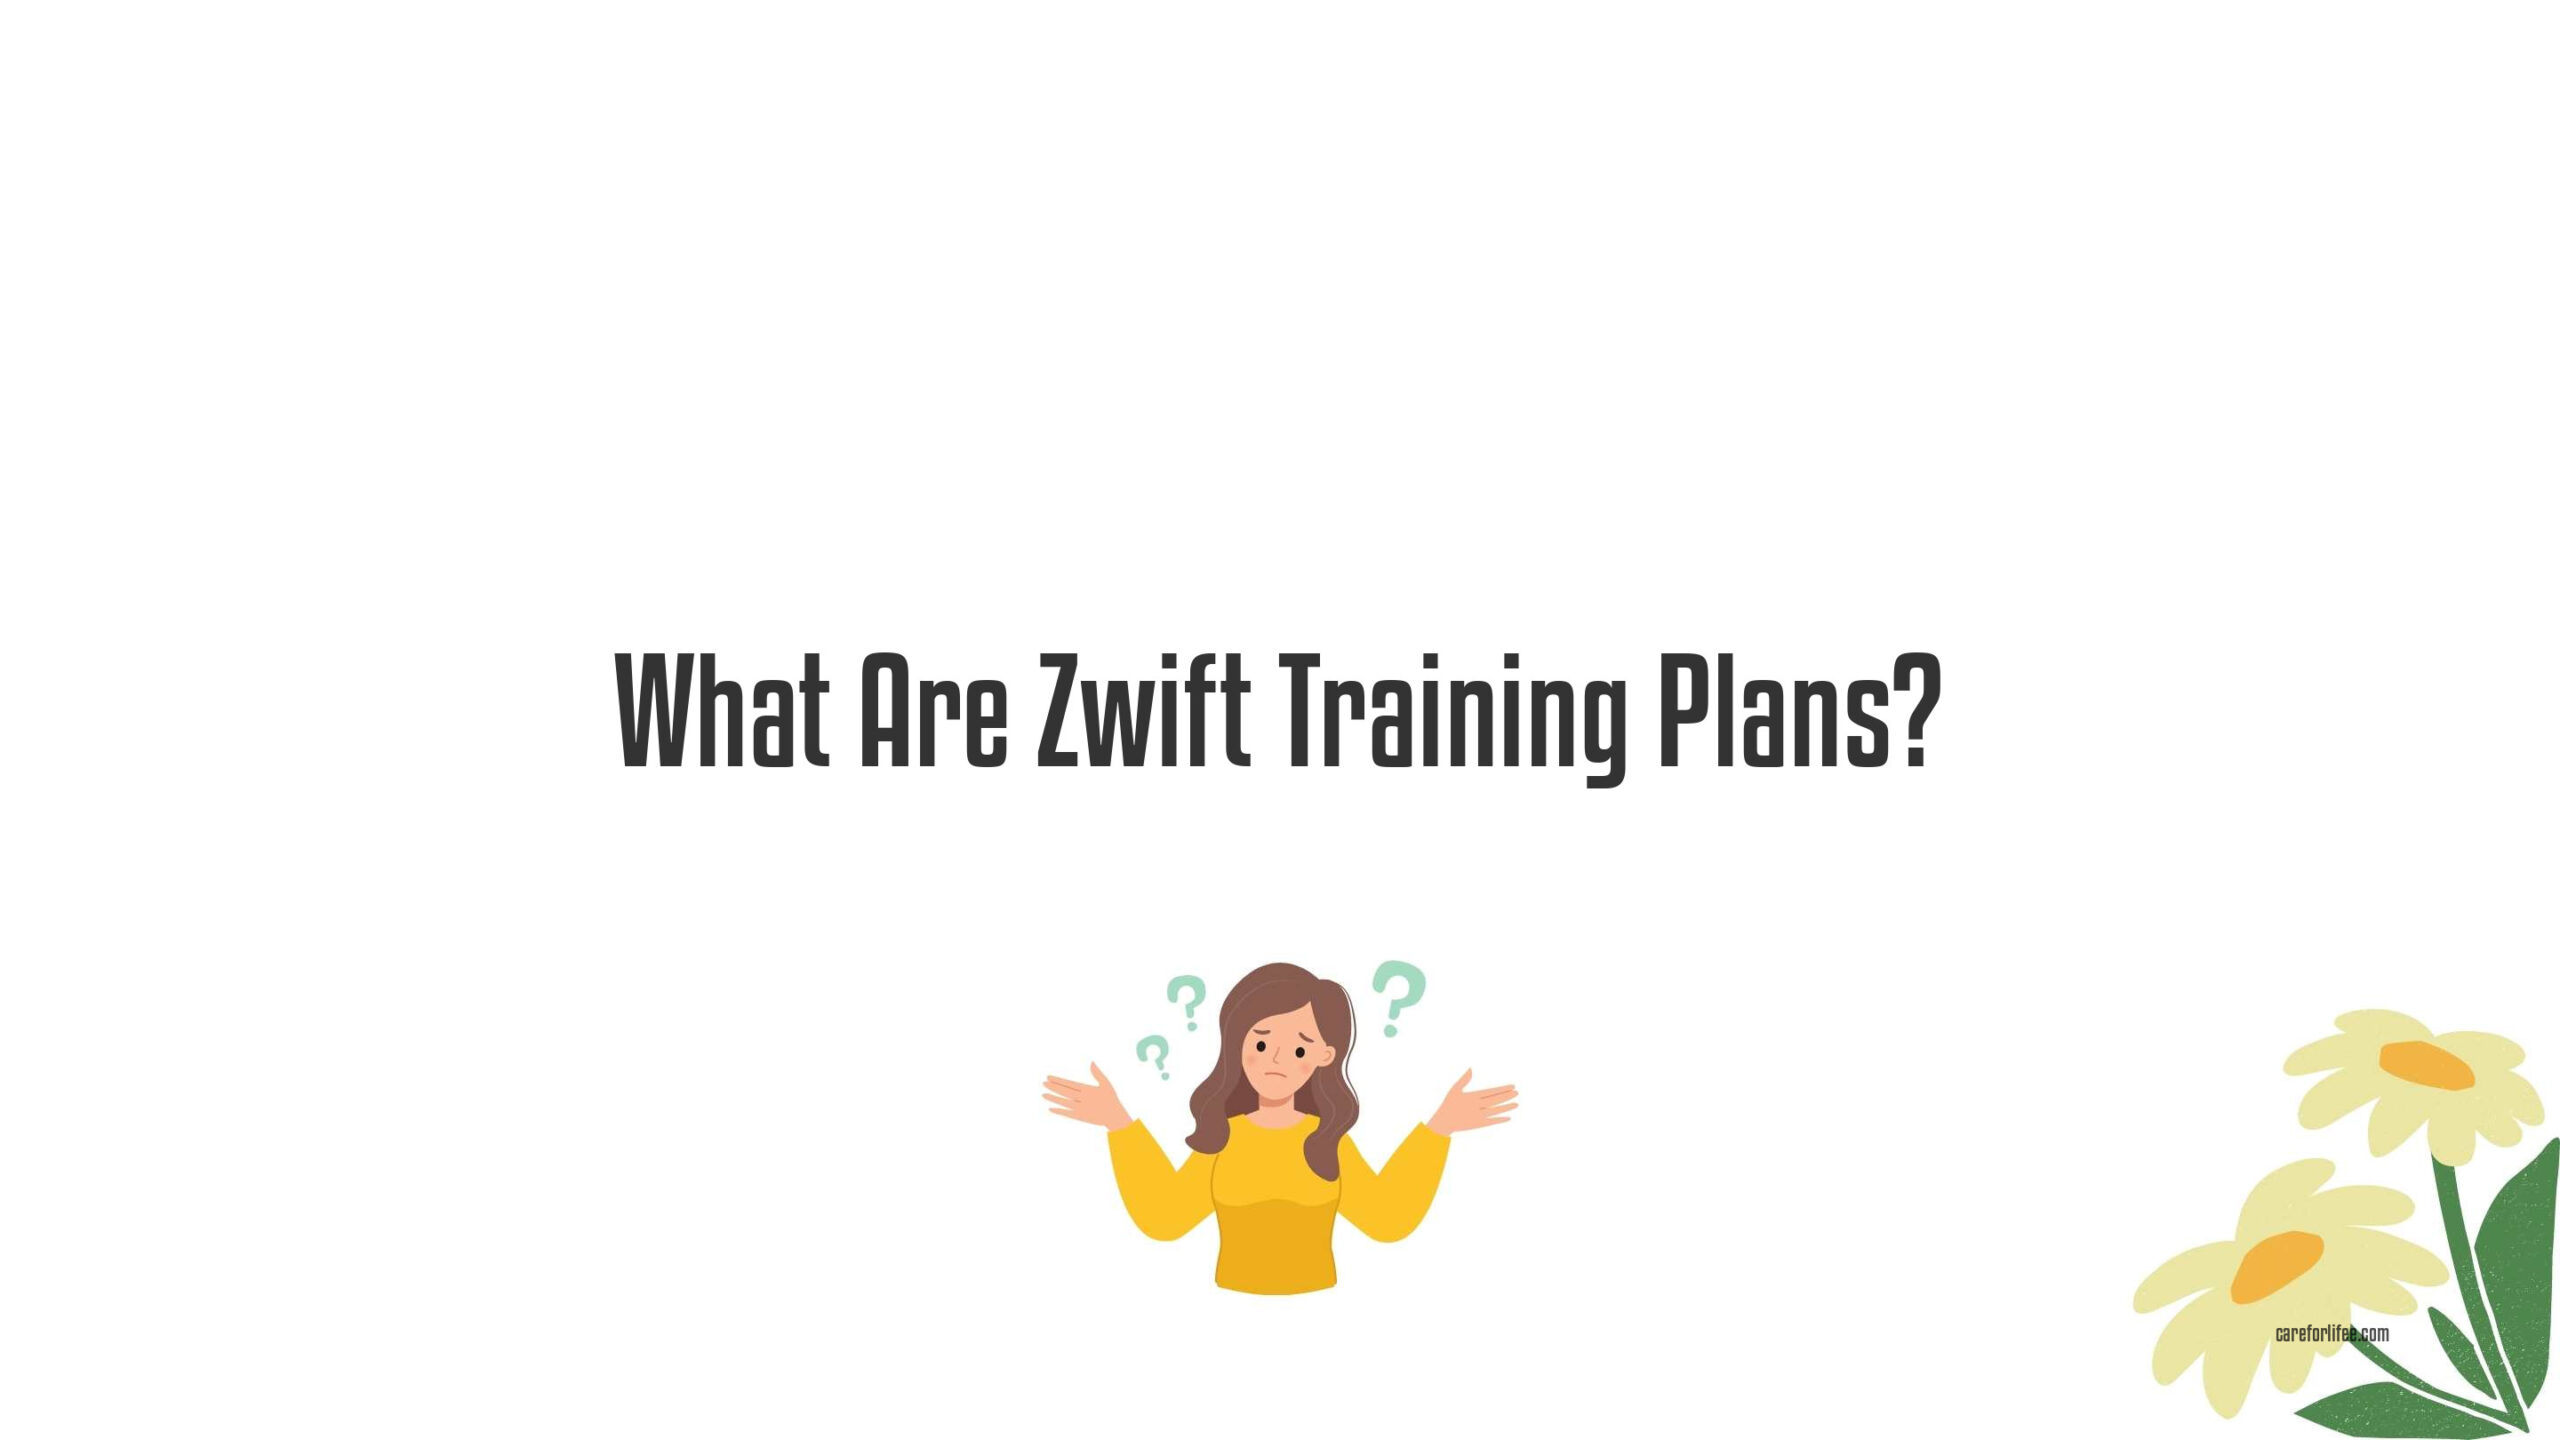 What Are Zwift Training Plans?